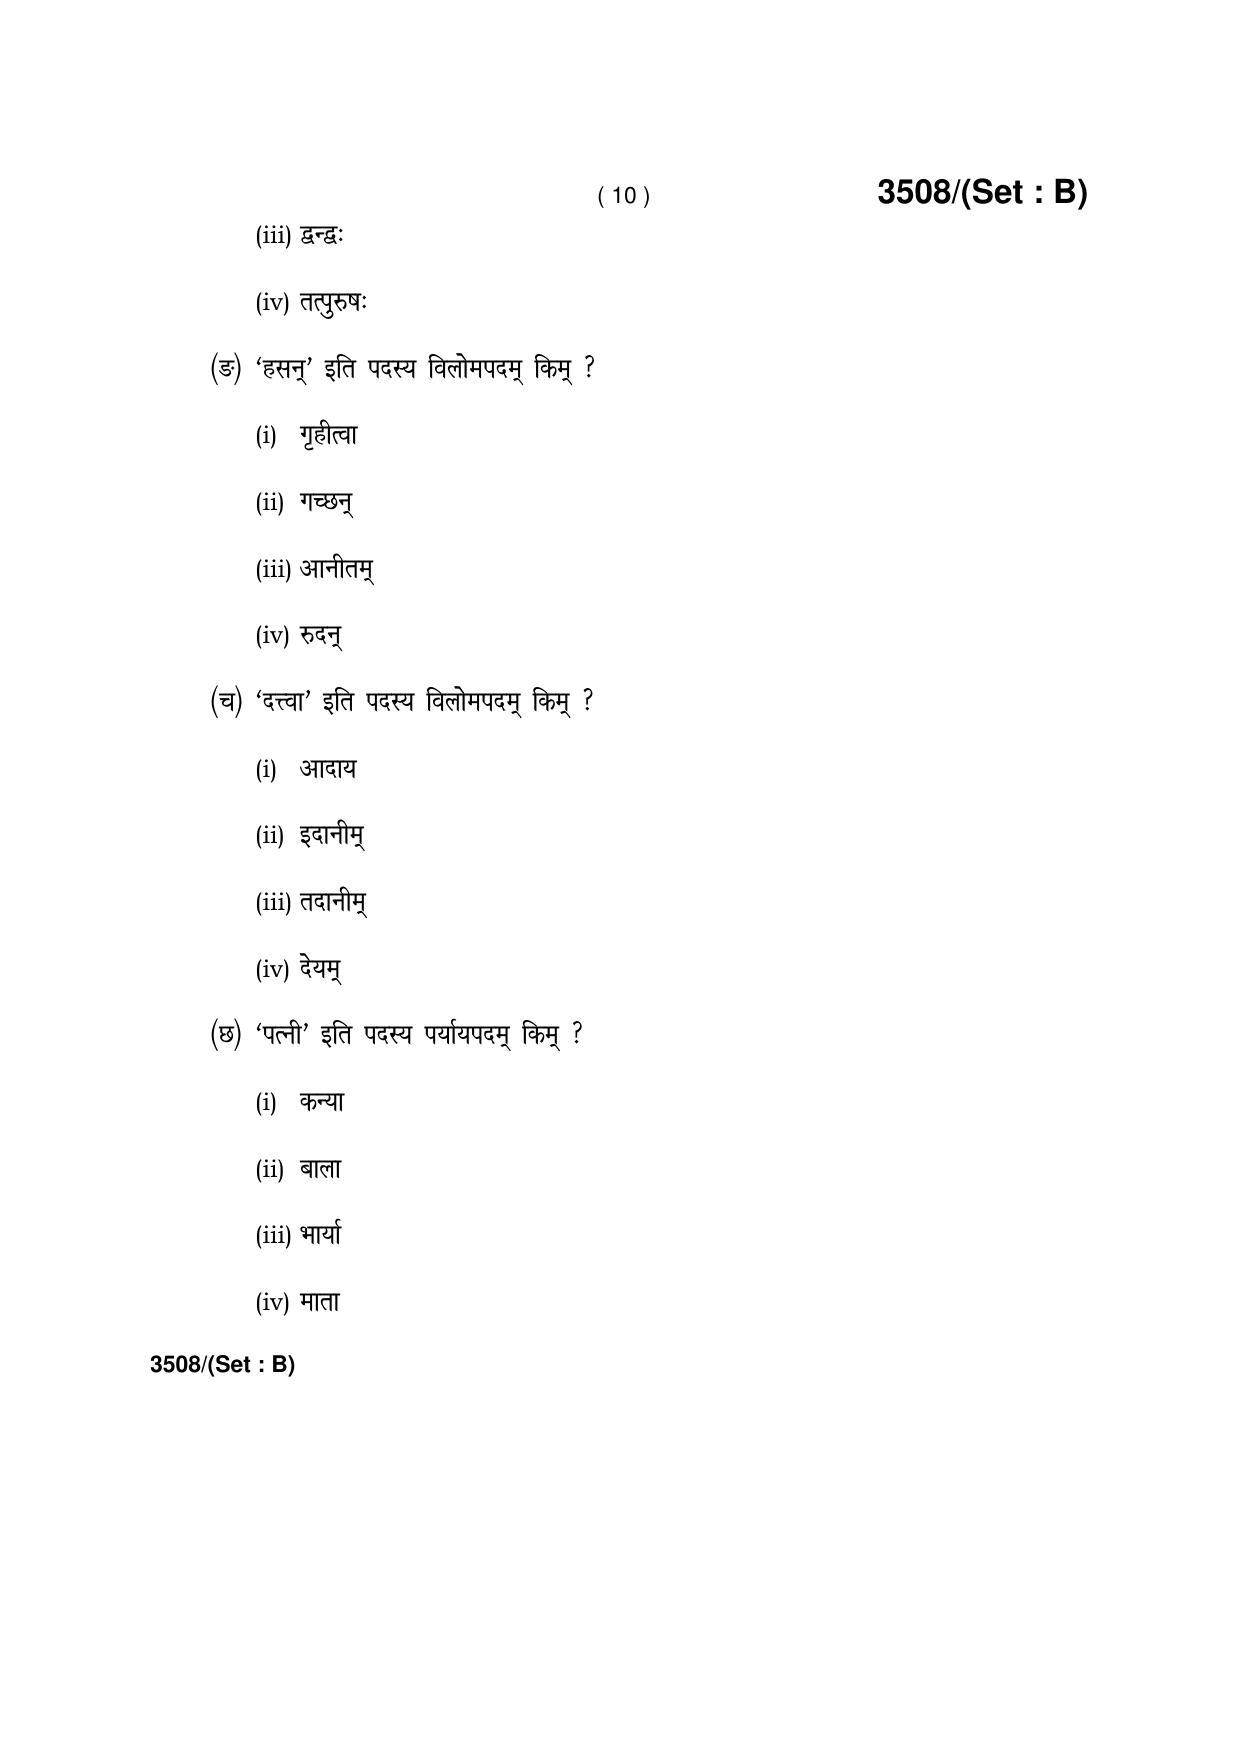 Haryana Board HBSE Class 10 Sanskrit -B 2018 Question Paper - Page 10